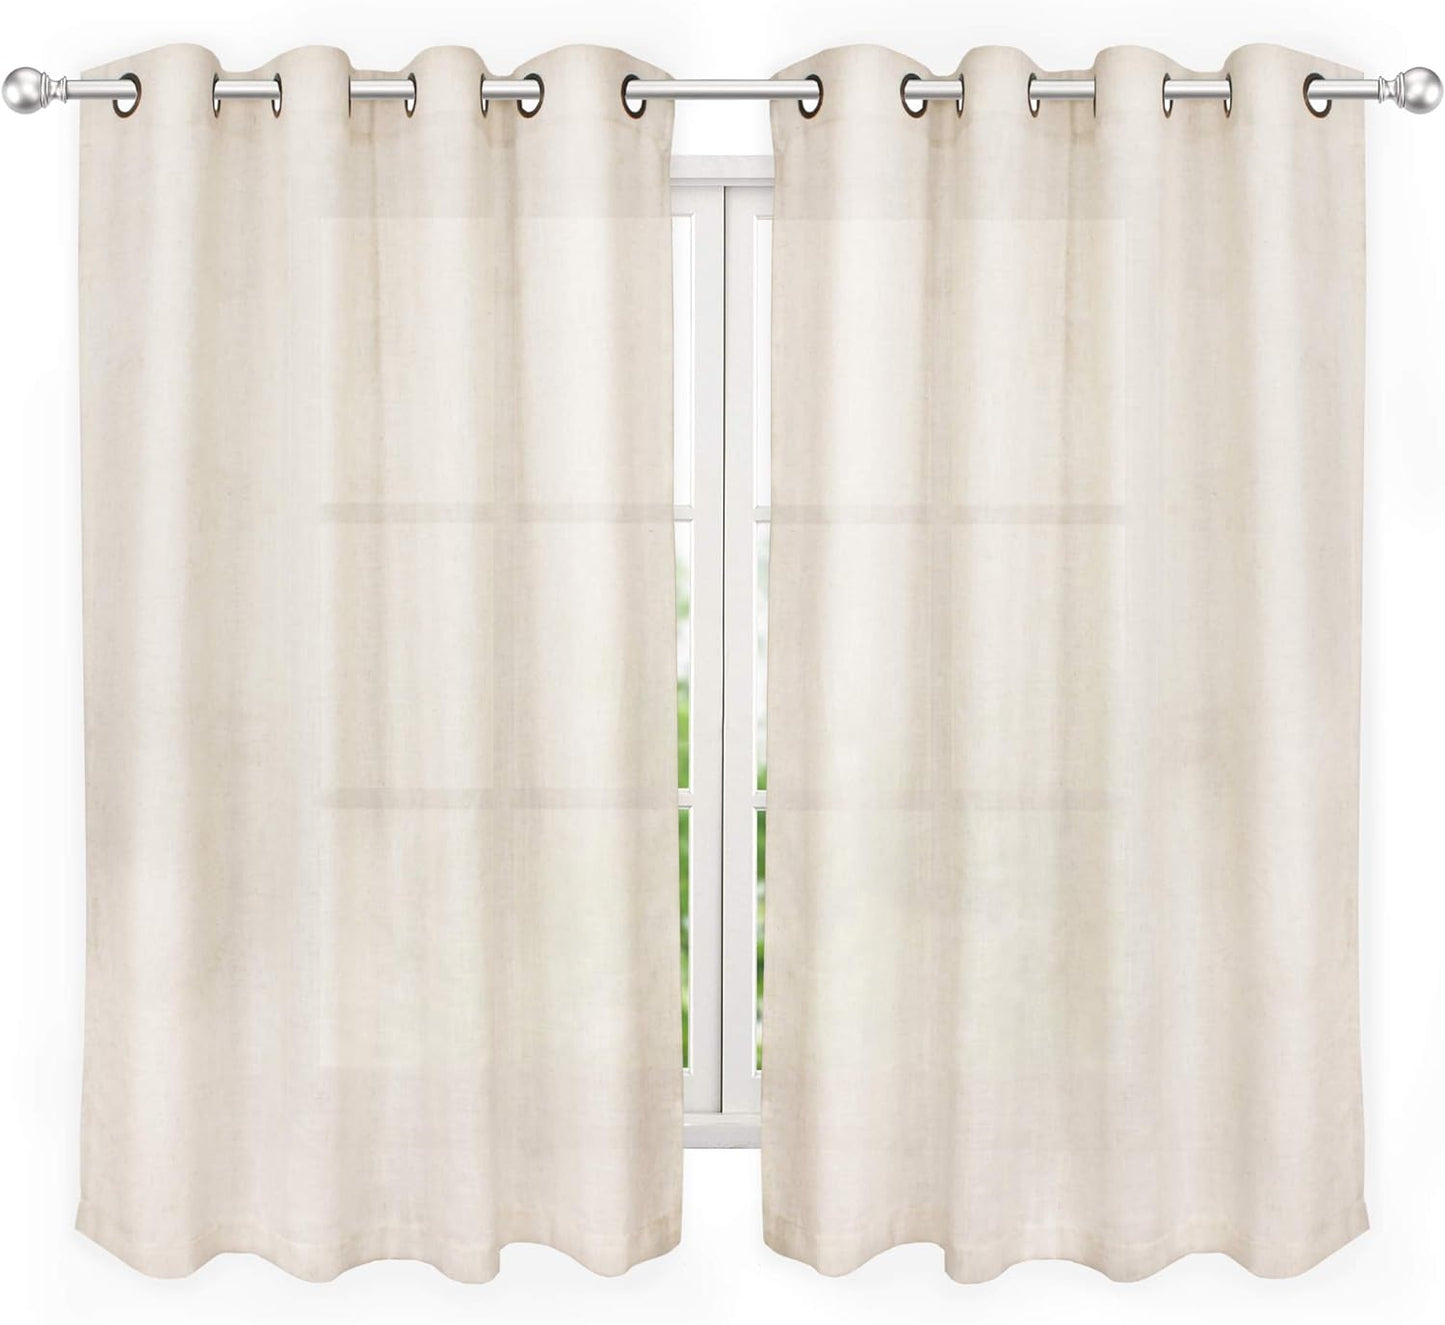 VOILYBIRD Palma Light Filtering Drapes Natural Linen Blended Semi Sheer Curtains 84 Inches Long Bronze Grommet for Bedroom (Natural, 52" W X 84" L, 2 Panels)  VOILYBIRD Natural 52"W X 45"L 